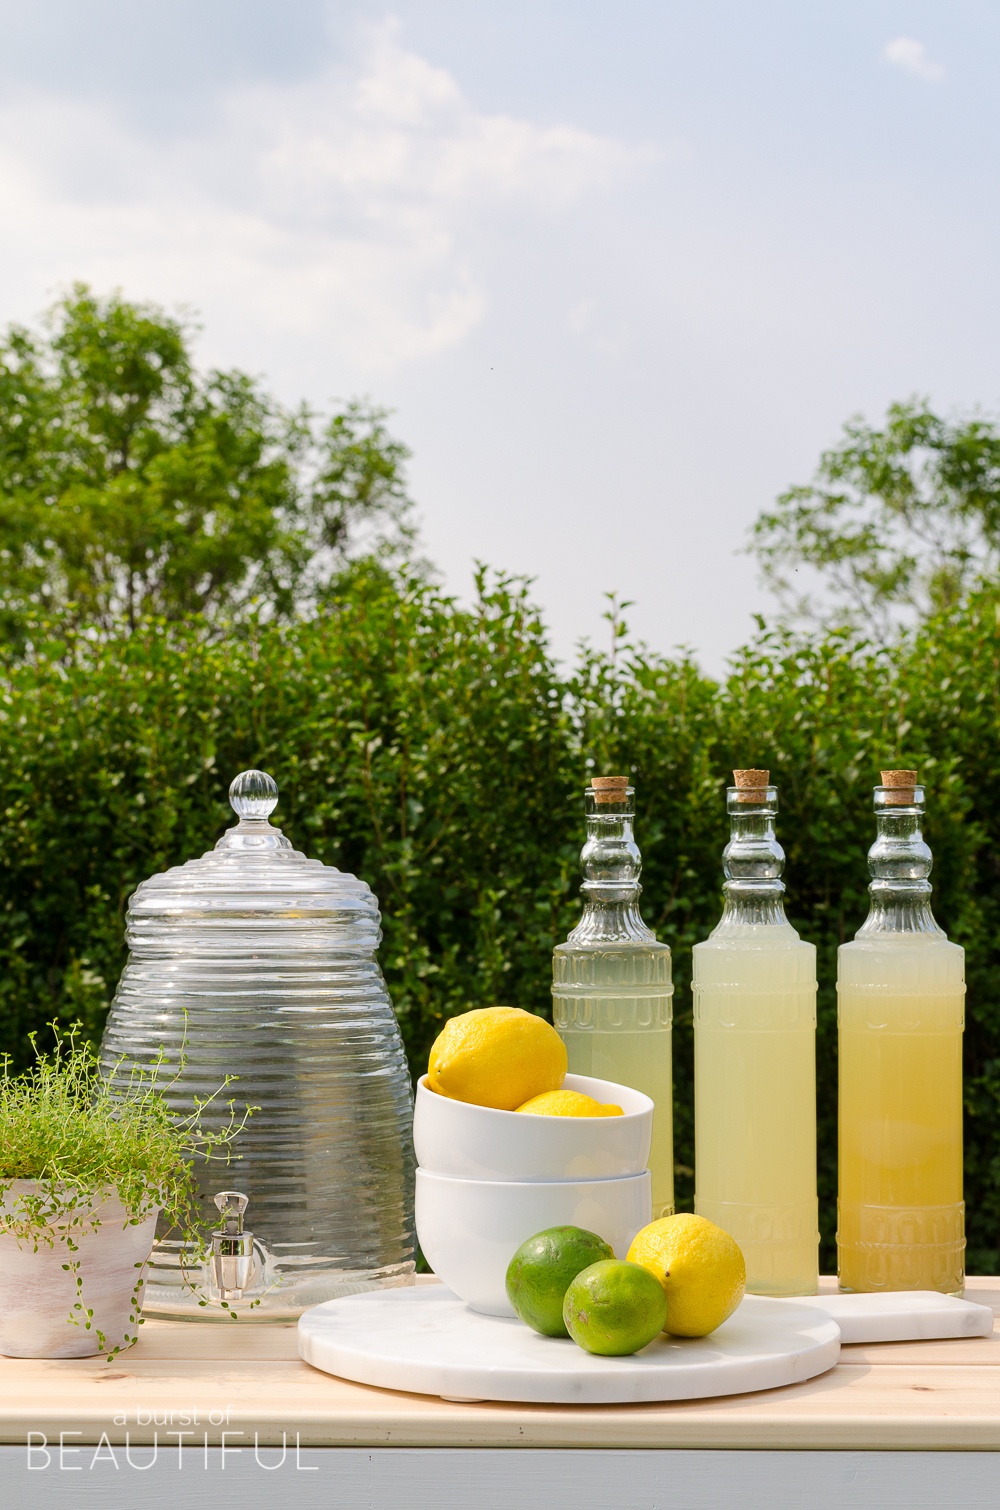 Summer entertaining is easy with this beautiful DIY outdoor bar + free plans.